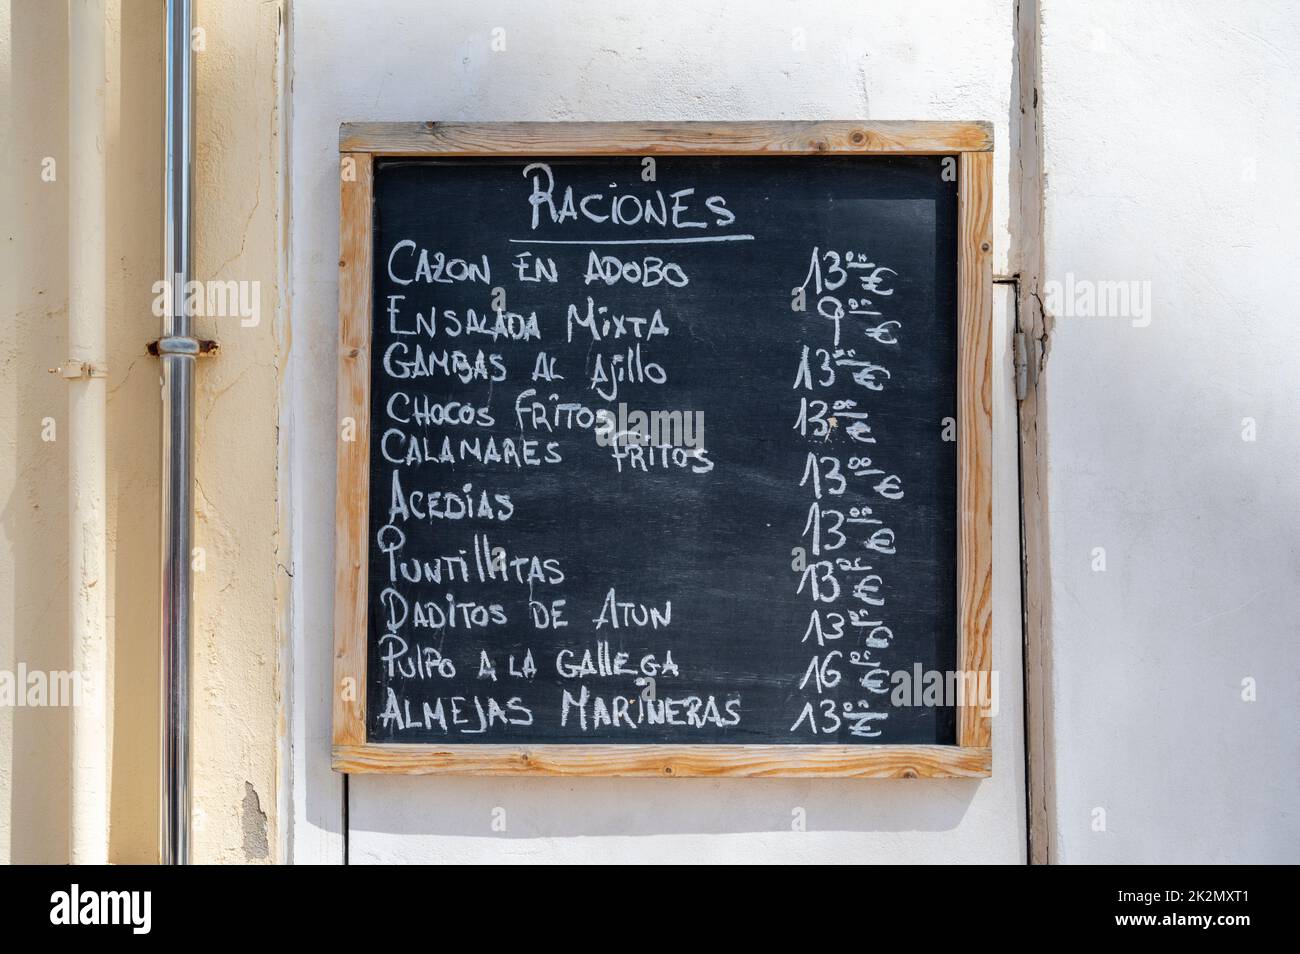 A menu for tapas or raciones on a blackboard outside a restaurant or cafe in Spain Stock Photo